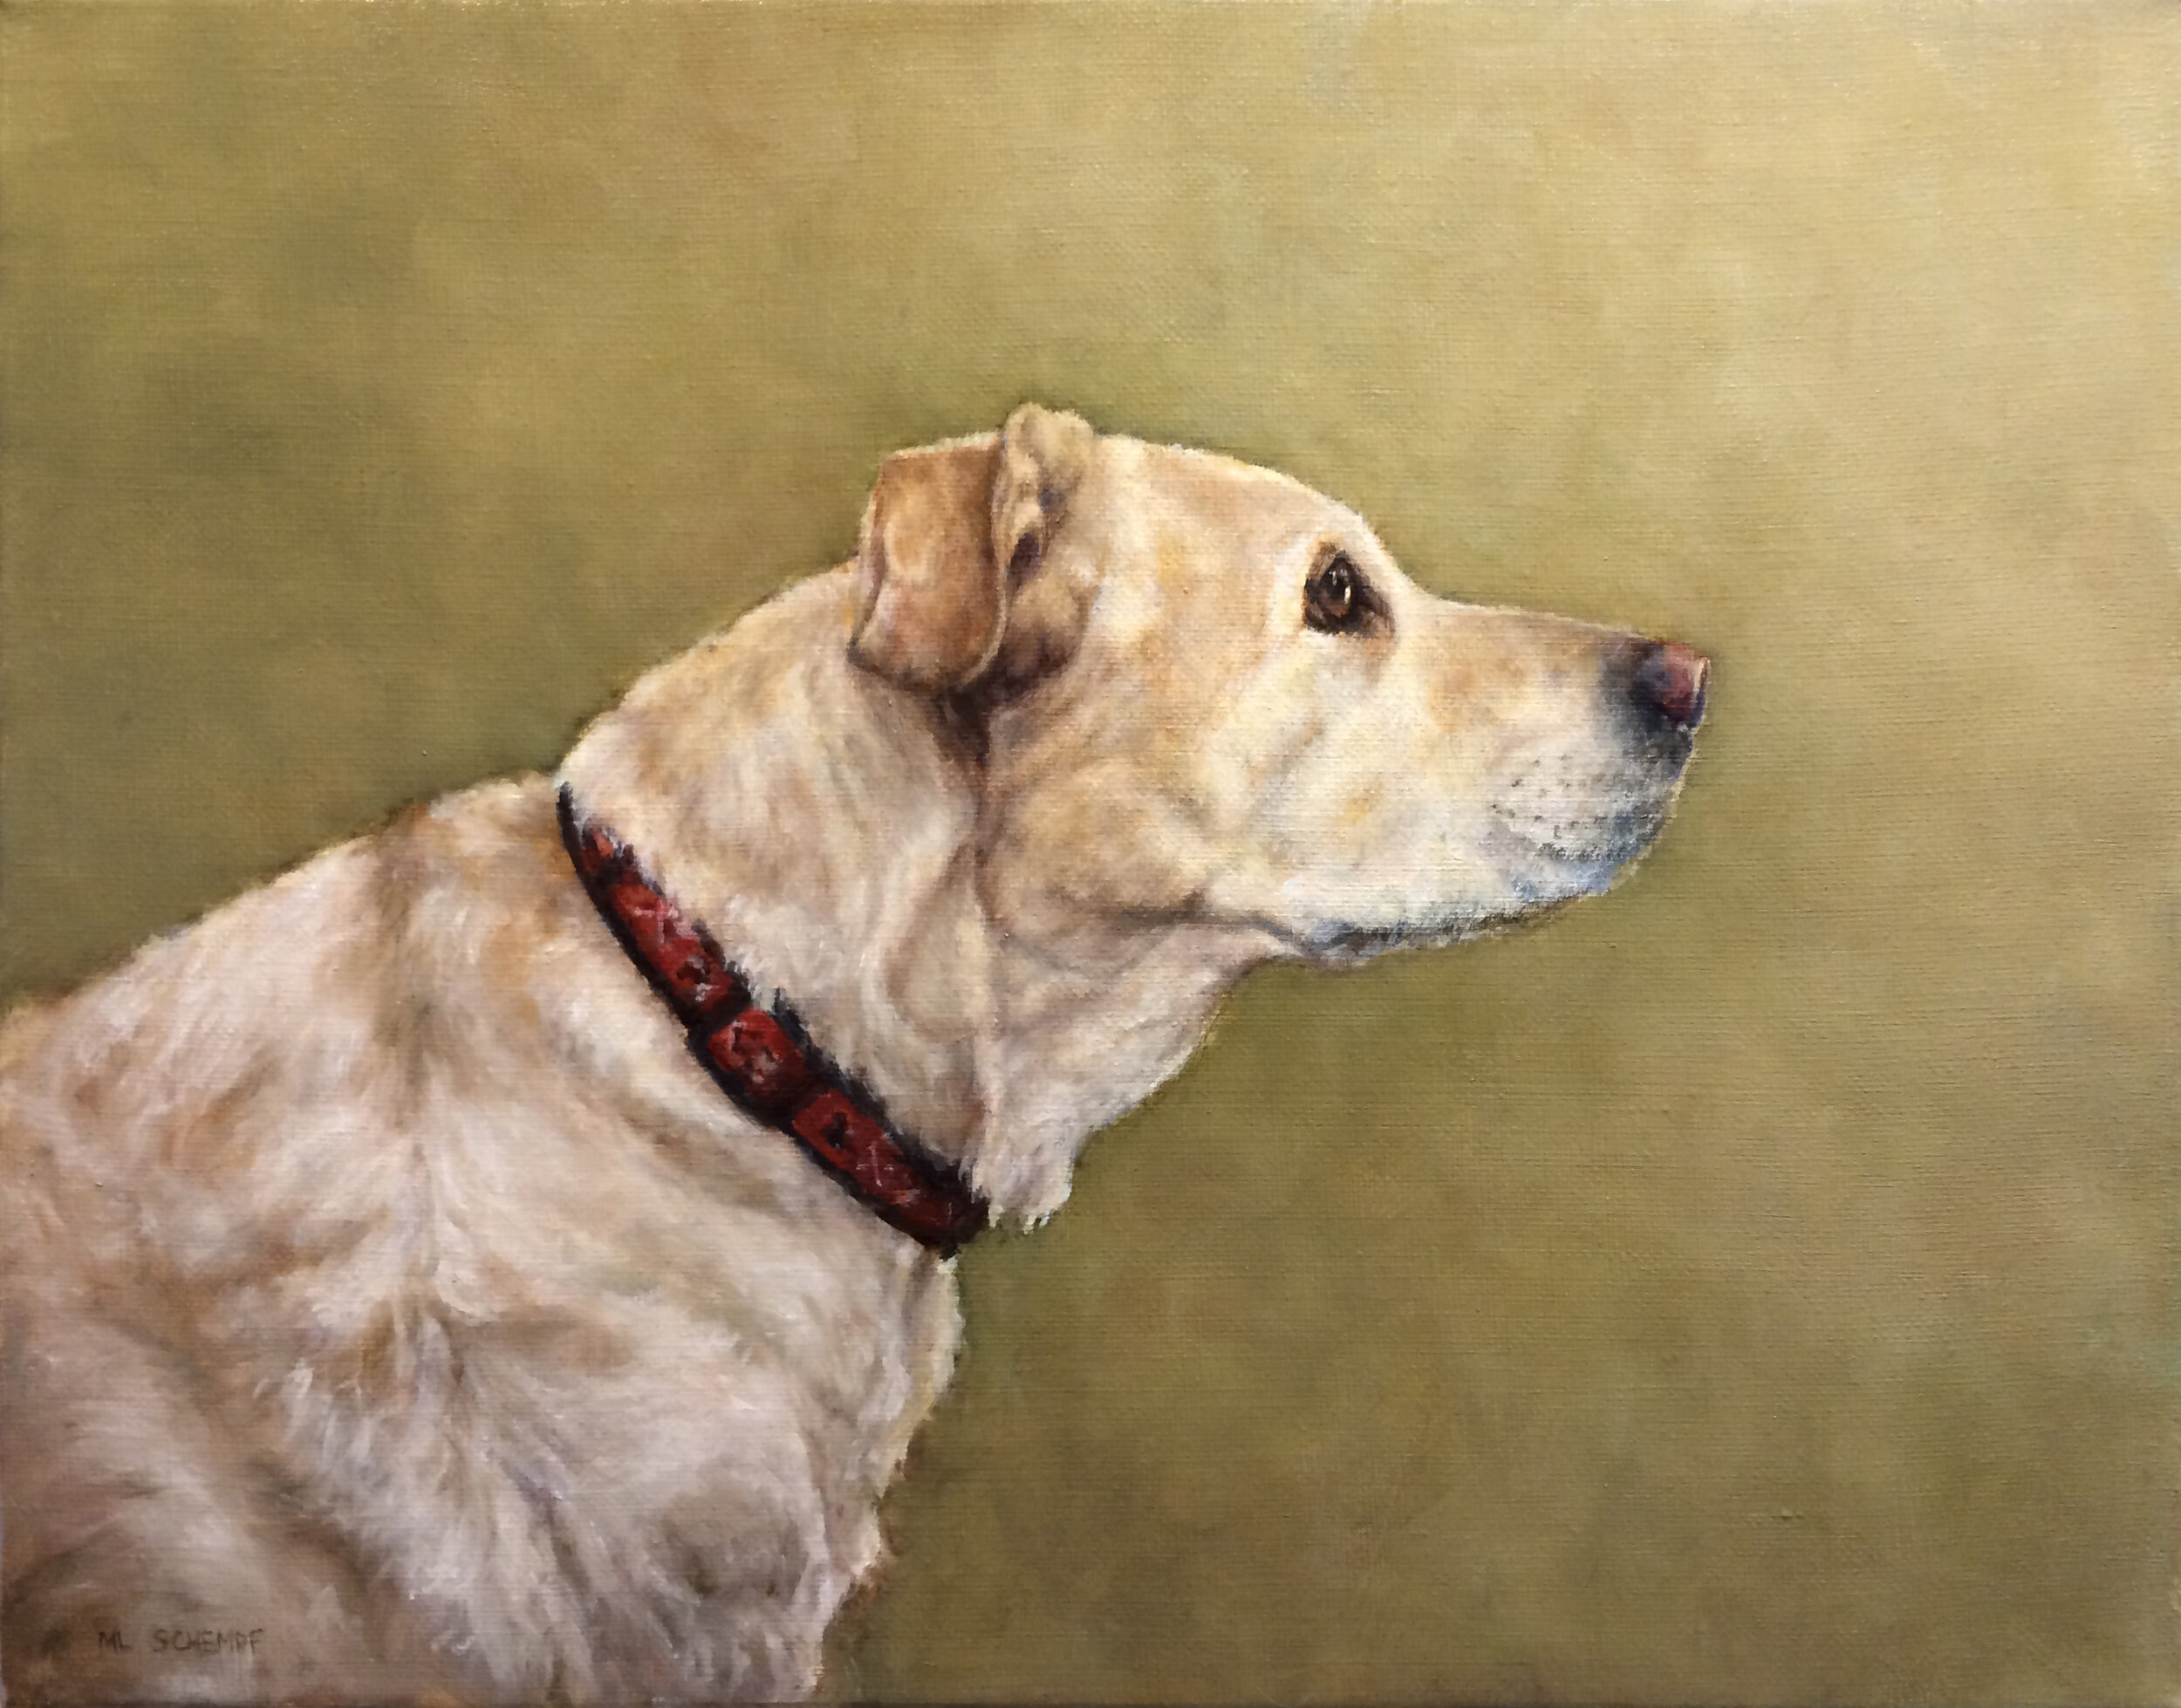  Mary Lou Schempf  Harley,    11” x 14”, oil on linen  (private collection)  